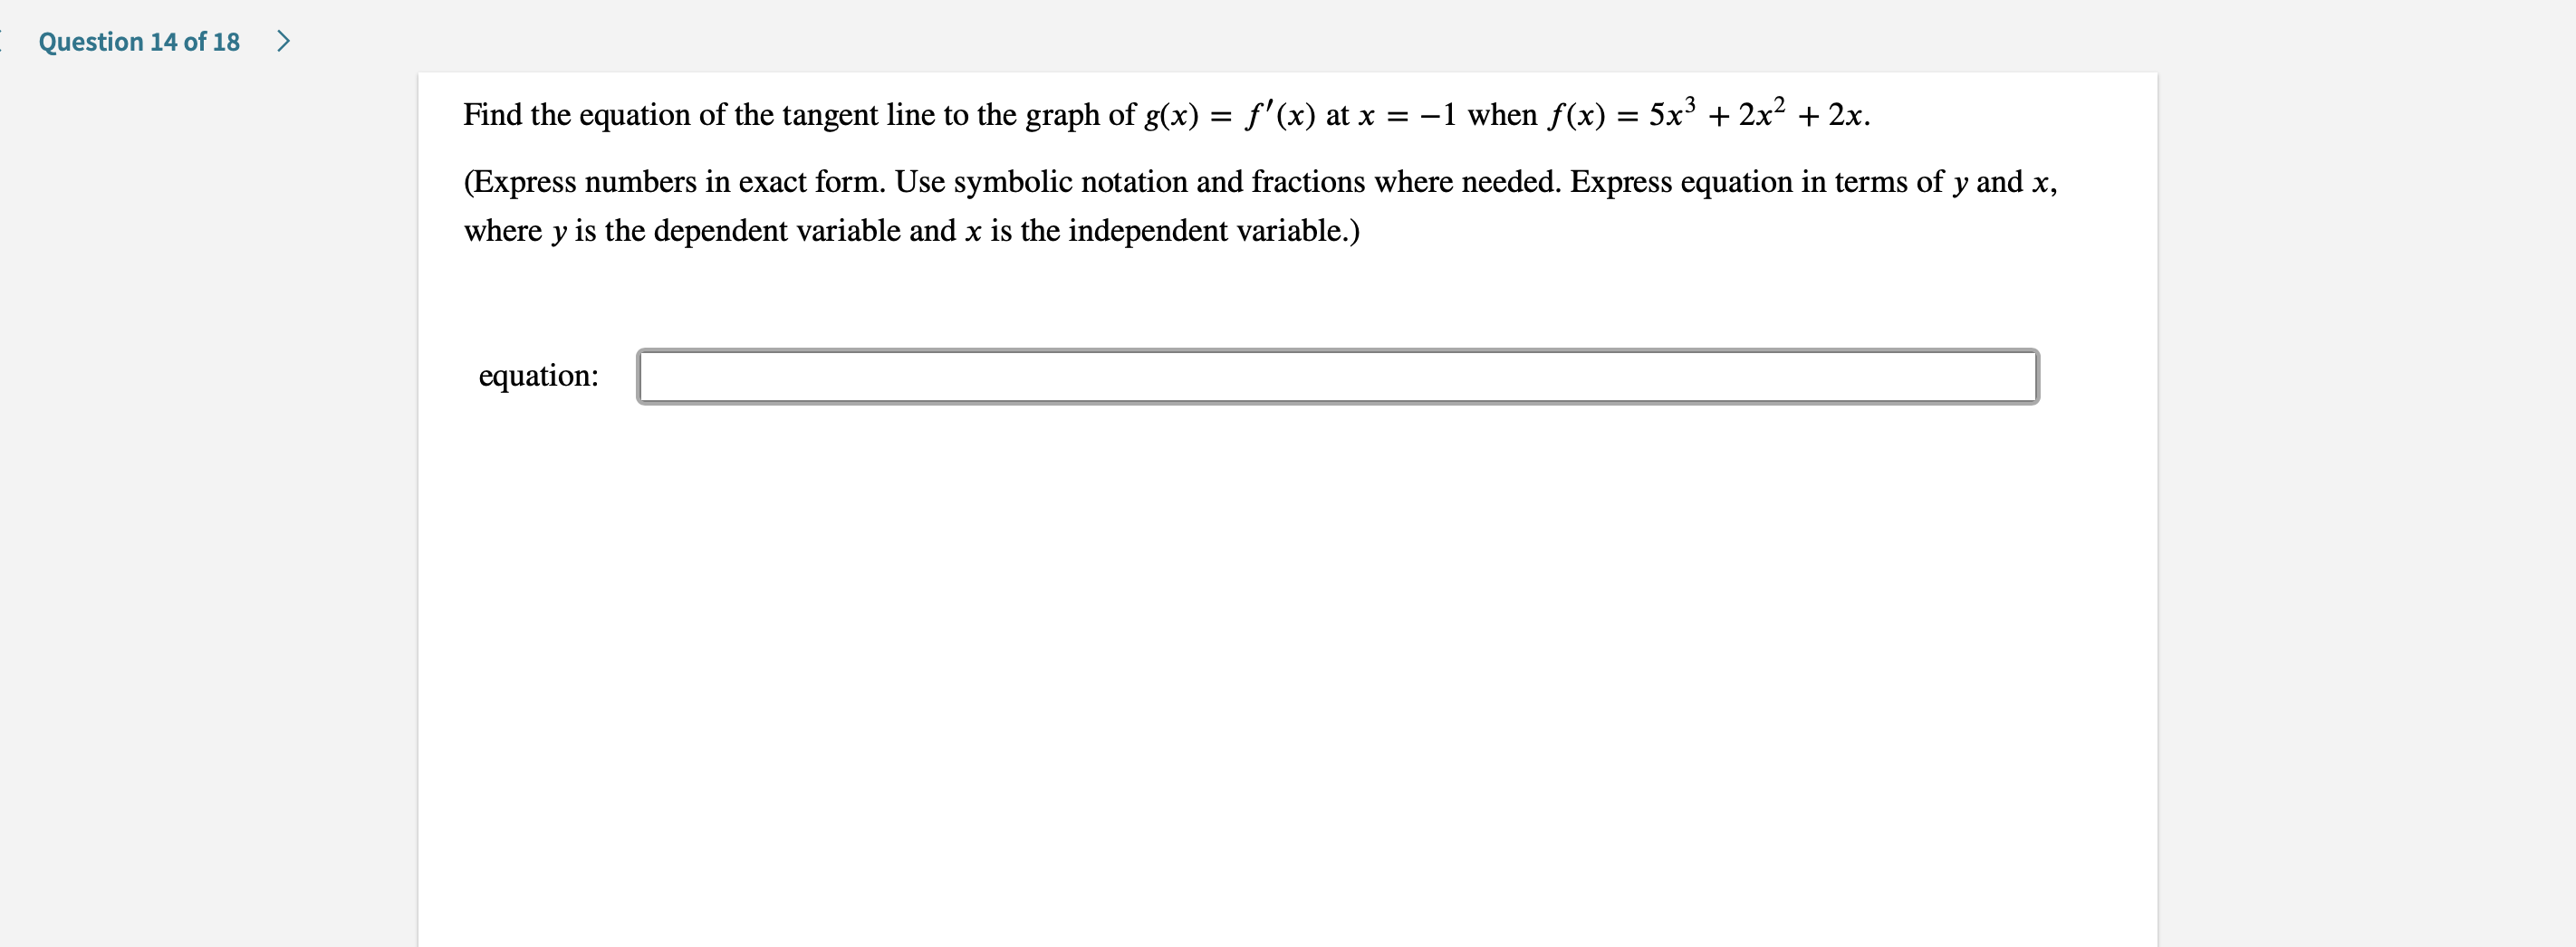 Question 14 of 18
Find the equation of the tangent line to the graph of g(x) = f'(x) at x
=-1 when f(x) = 5x3 +2x2 2x
(Express numbers in exact form. Use symbolic notation and fractions where needed. Express equation in terms of y and x,
where y is the dependent variable and x is the independent variable.)
equation
